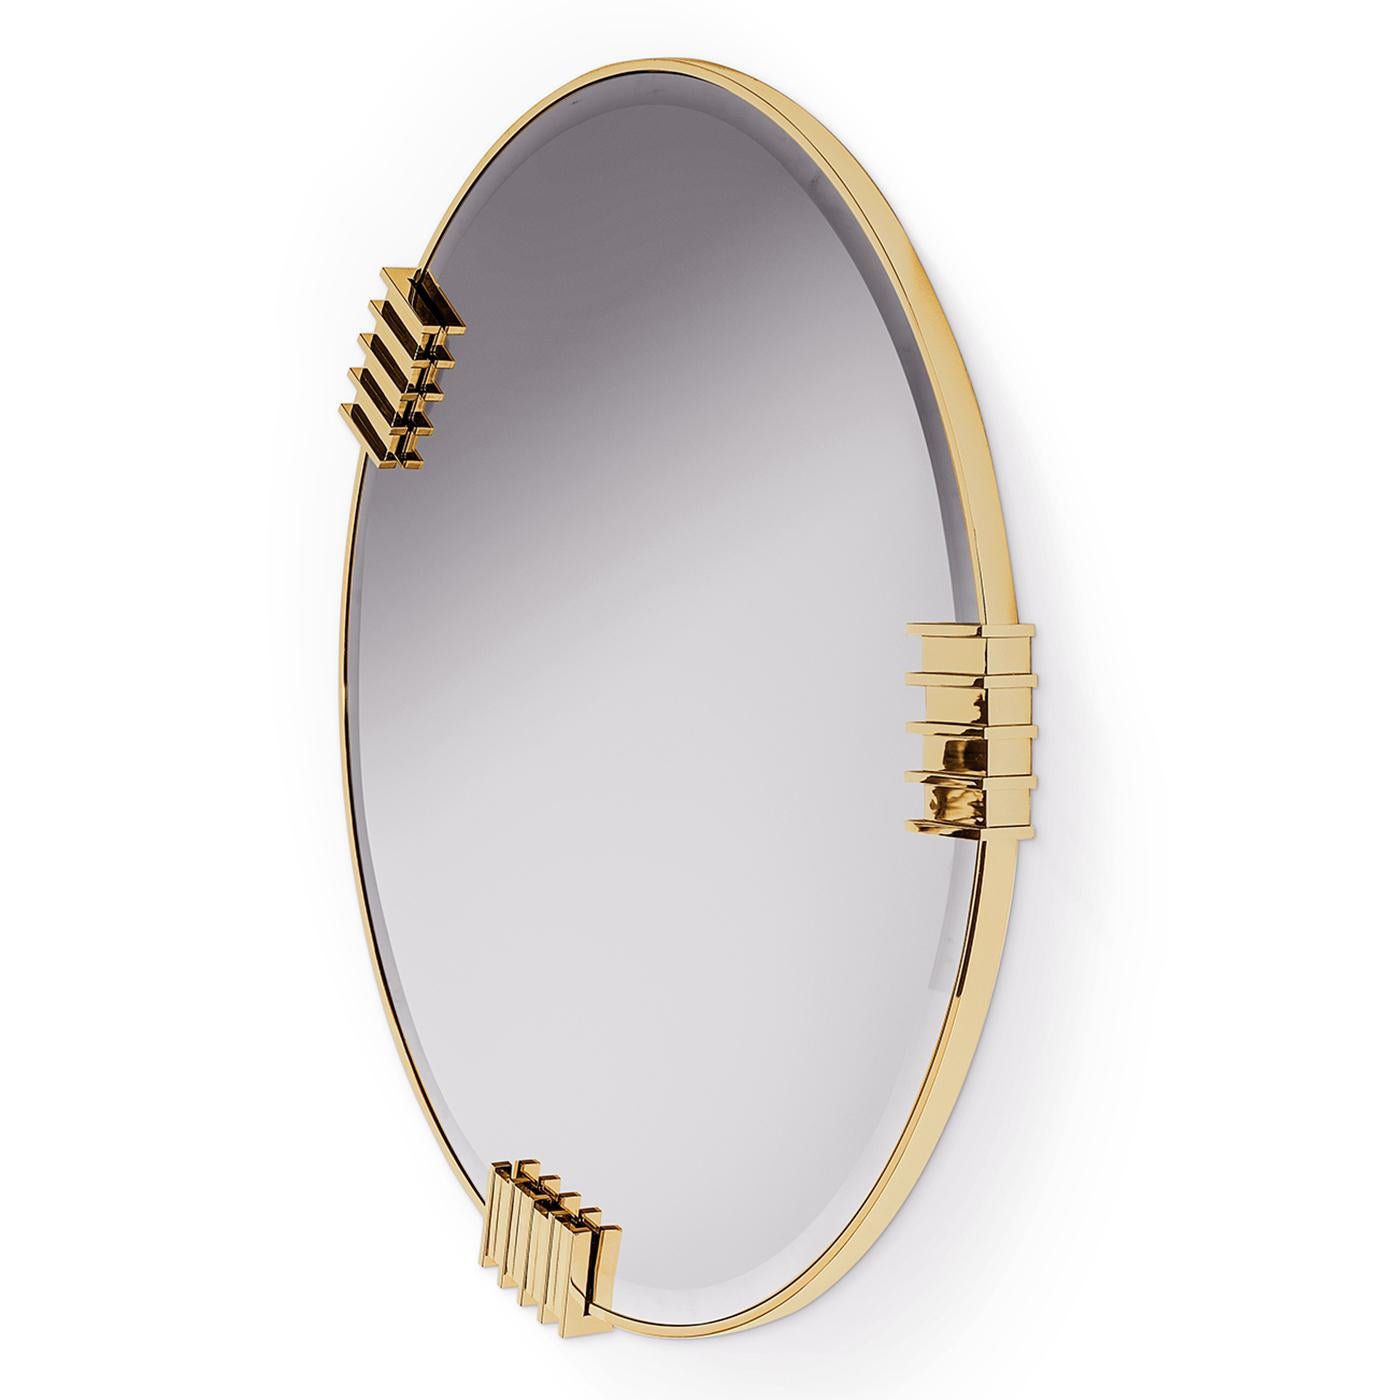 Mirror oldies round with solid brass frame in
polished finish and with round bevelled mirror glass.